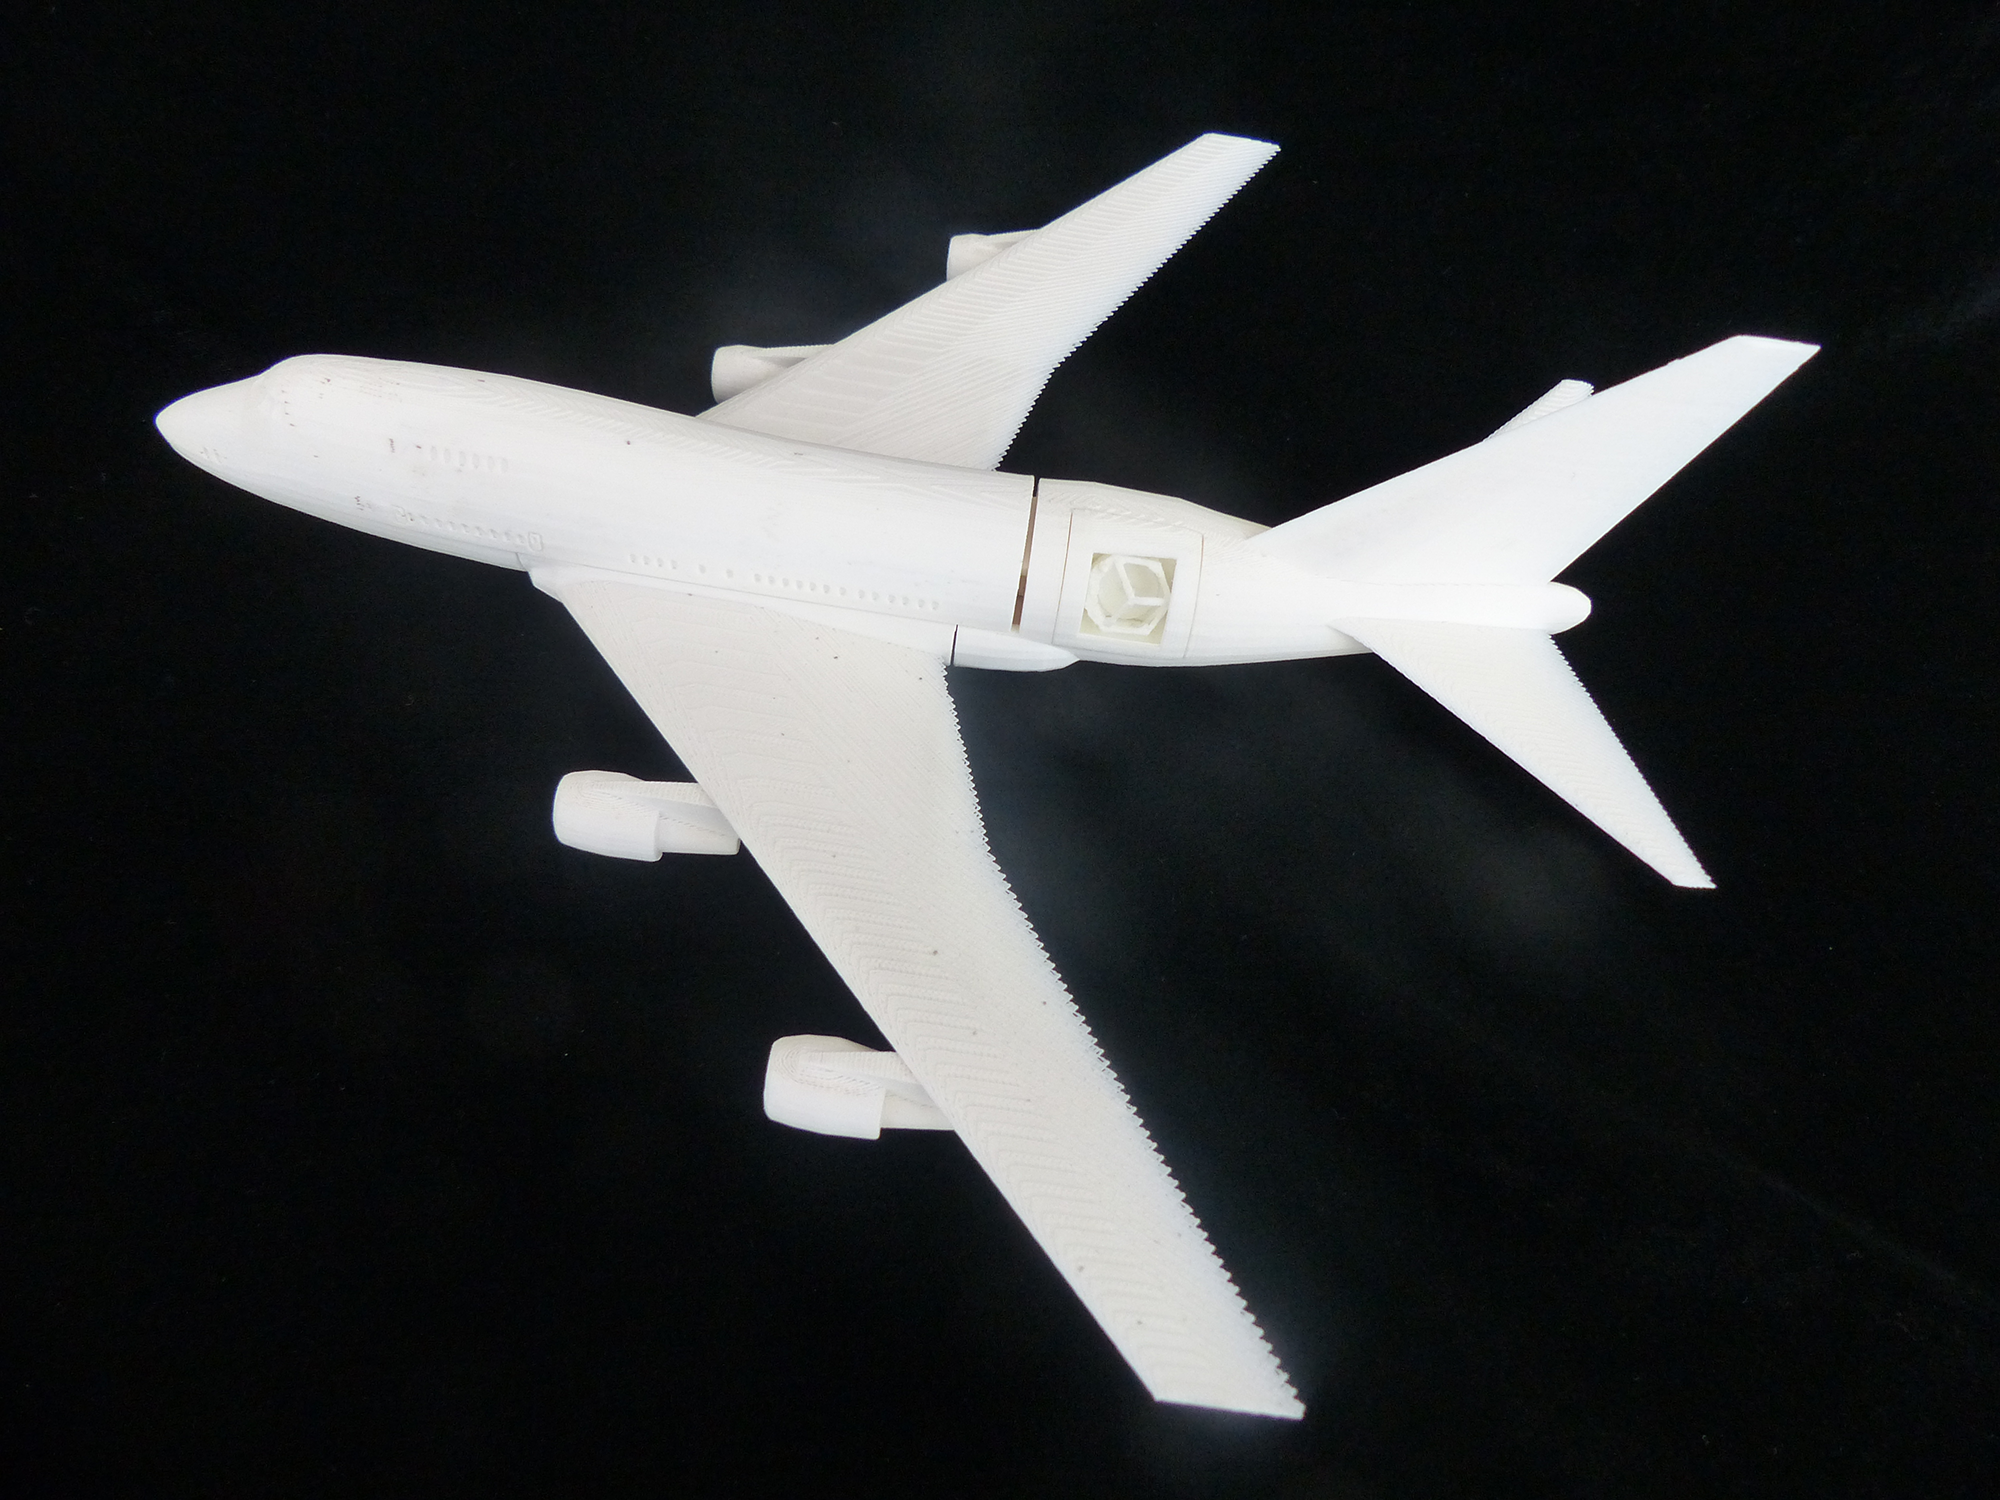 Image of 3D printed model of SOFIA.